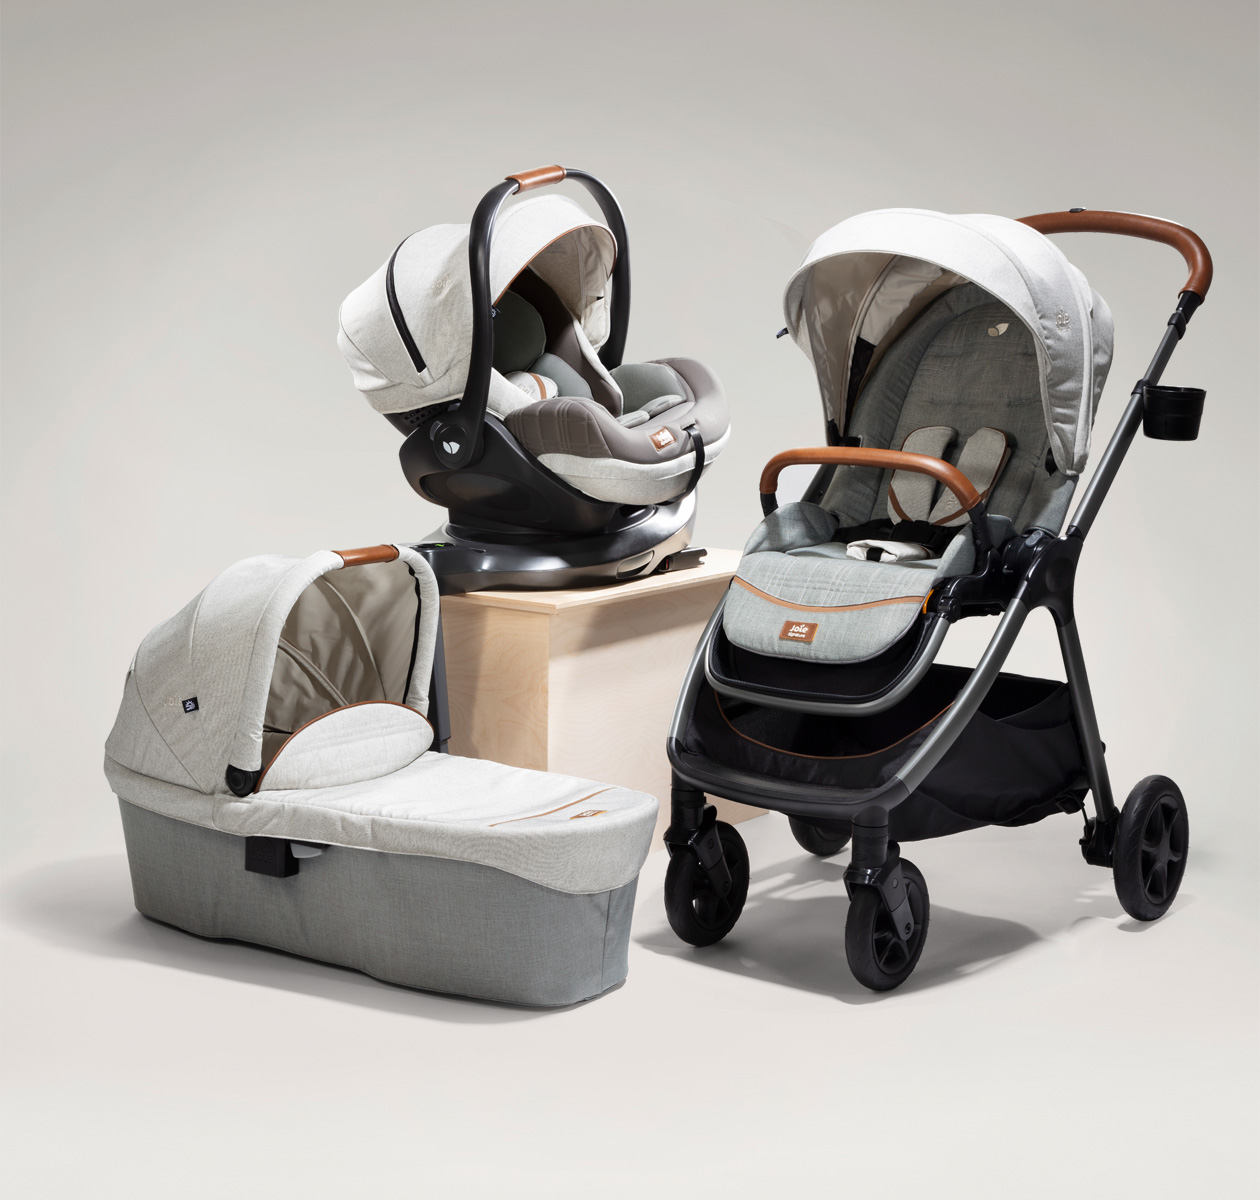 3 Joie Signature products in gray with brown leather accents: the Finiti pram, Ramble XL carry cot, and I-Level Recline infant car seat.